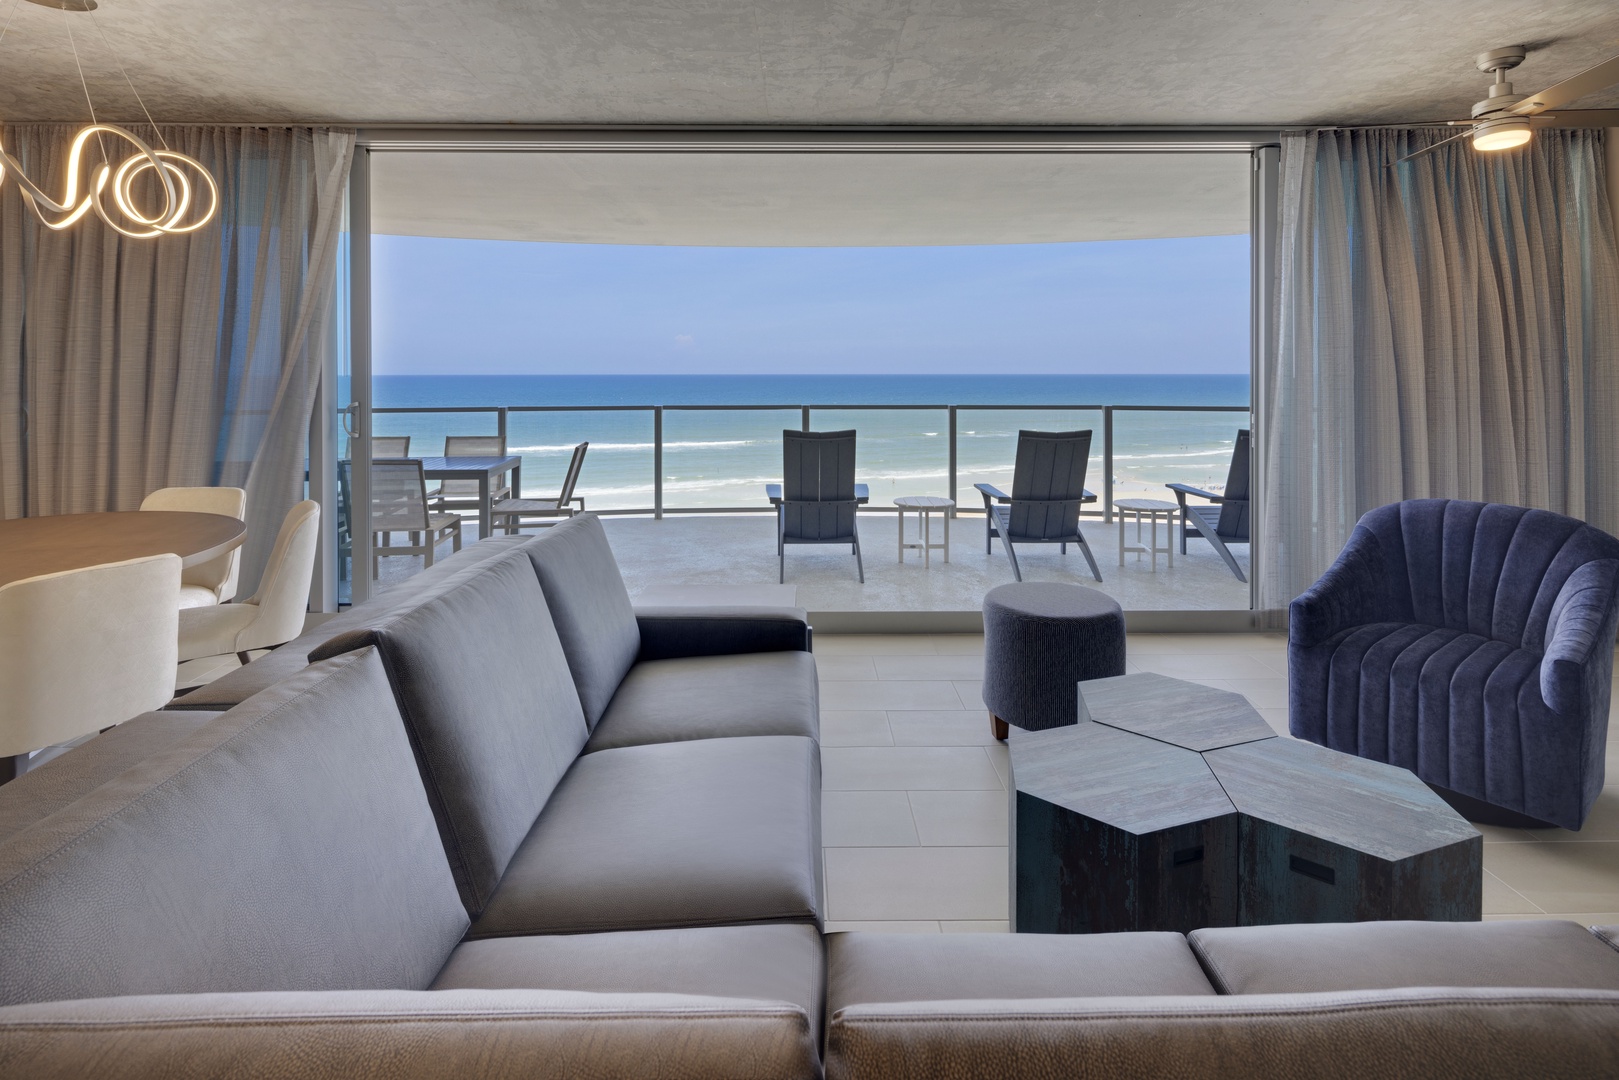 Seamless Indoor/Outdoor Living: The Spacious Living Room Opens to an Oceanfront Terrace